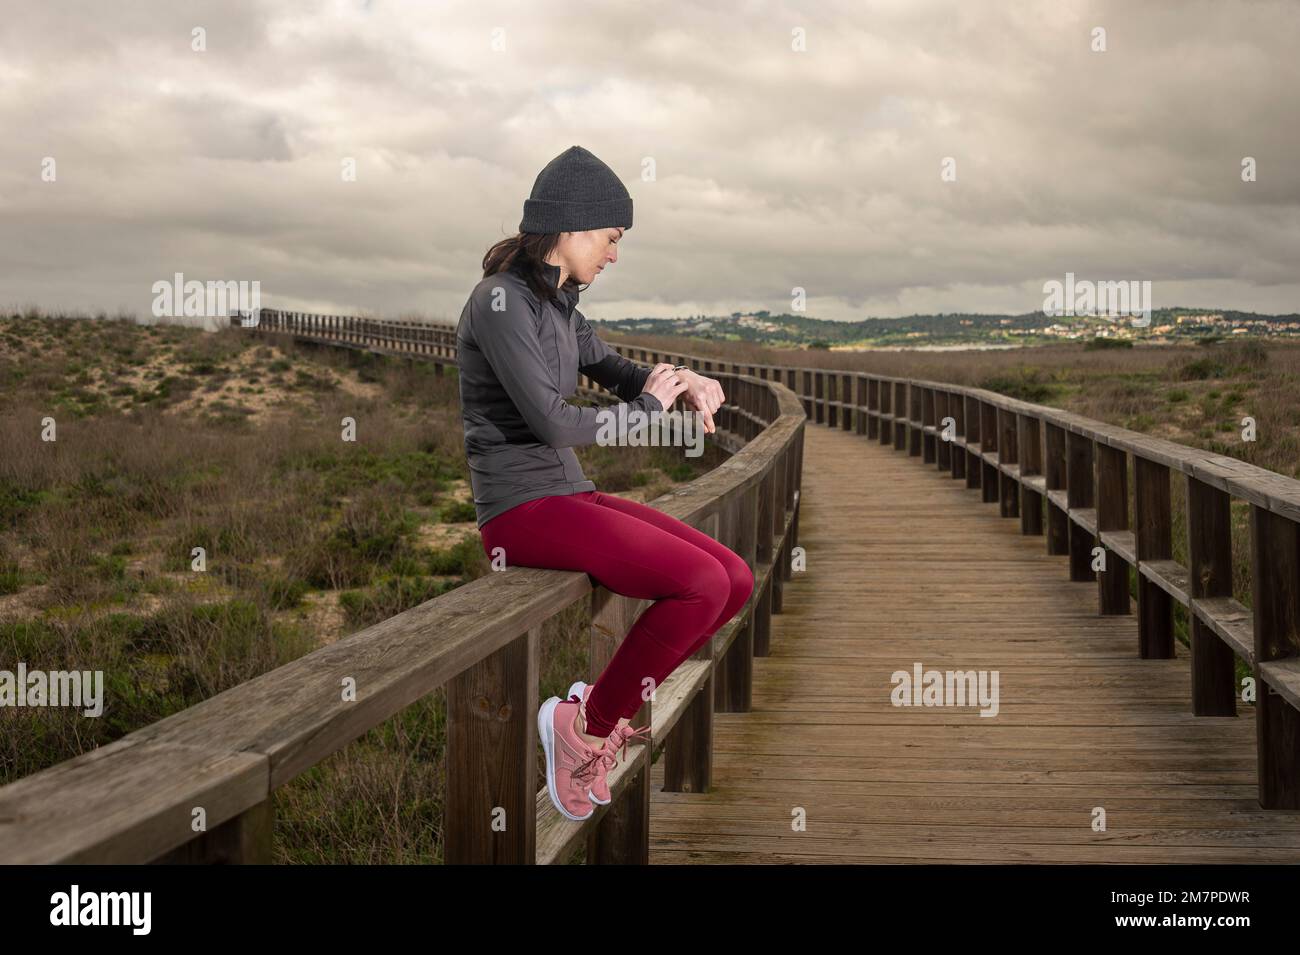 Female runner resting and checking her fitness tracker watch after running on a boardwalk. Stock Photo